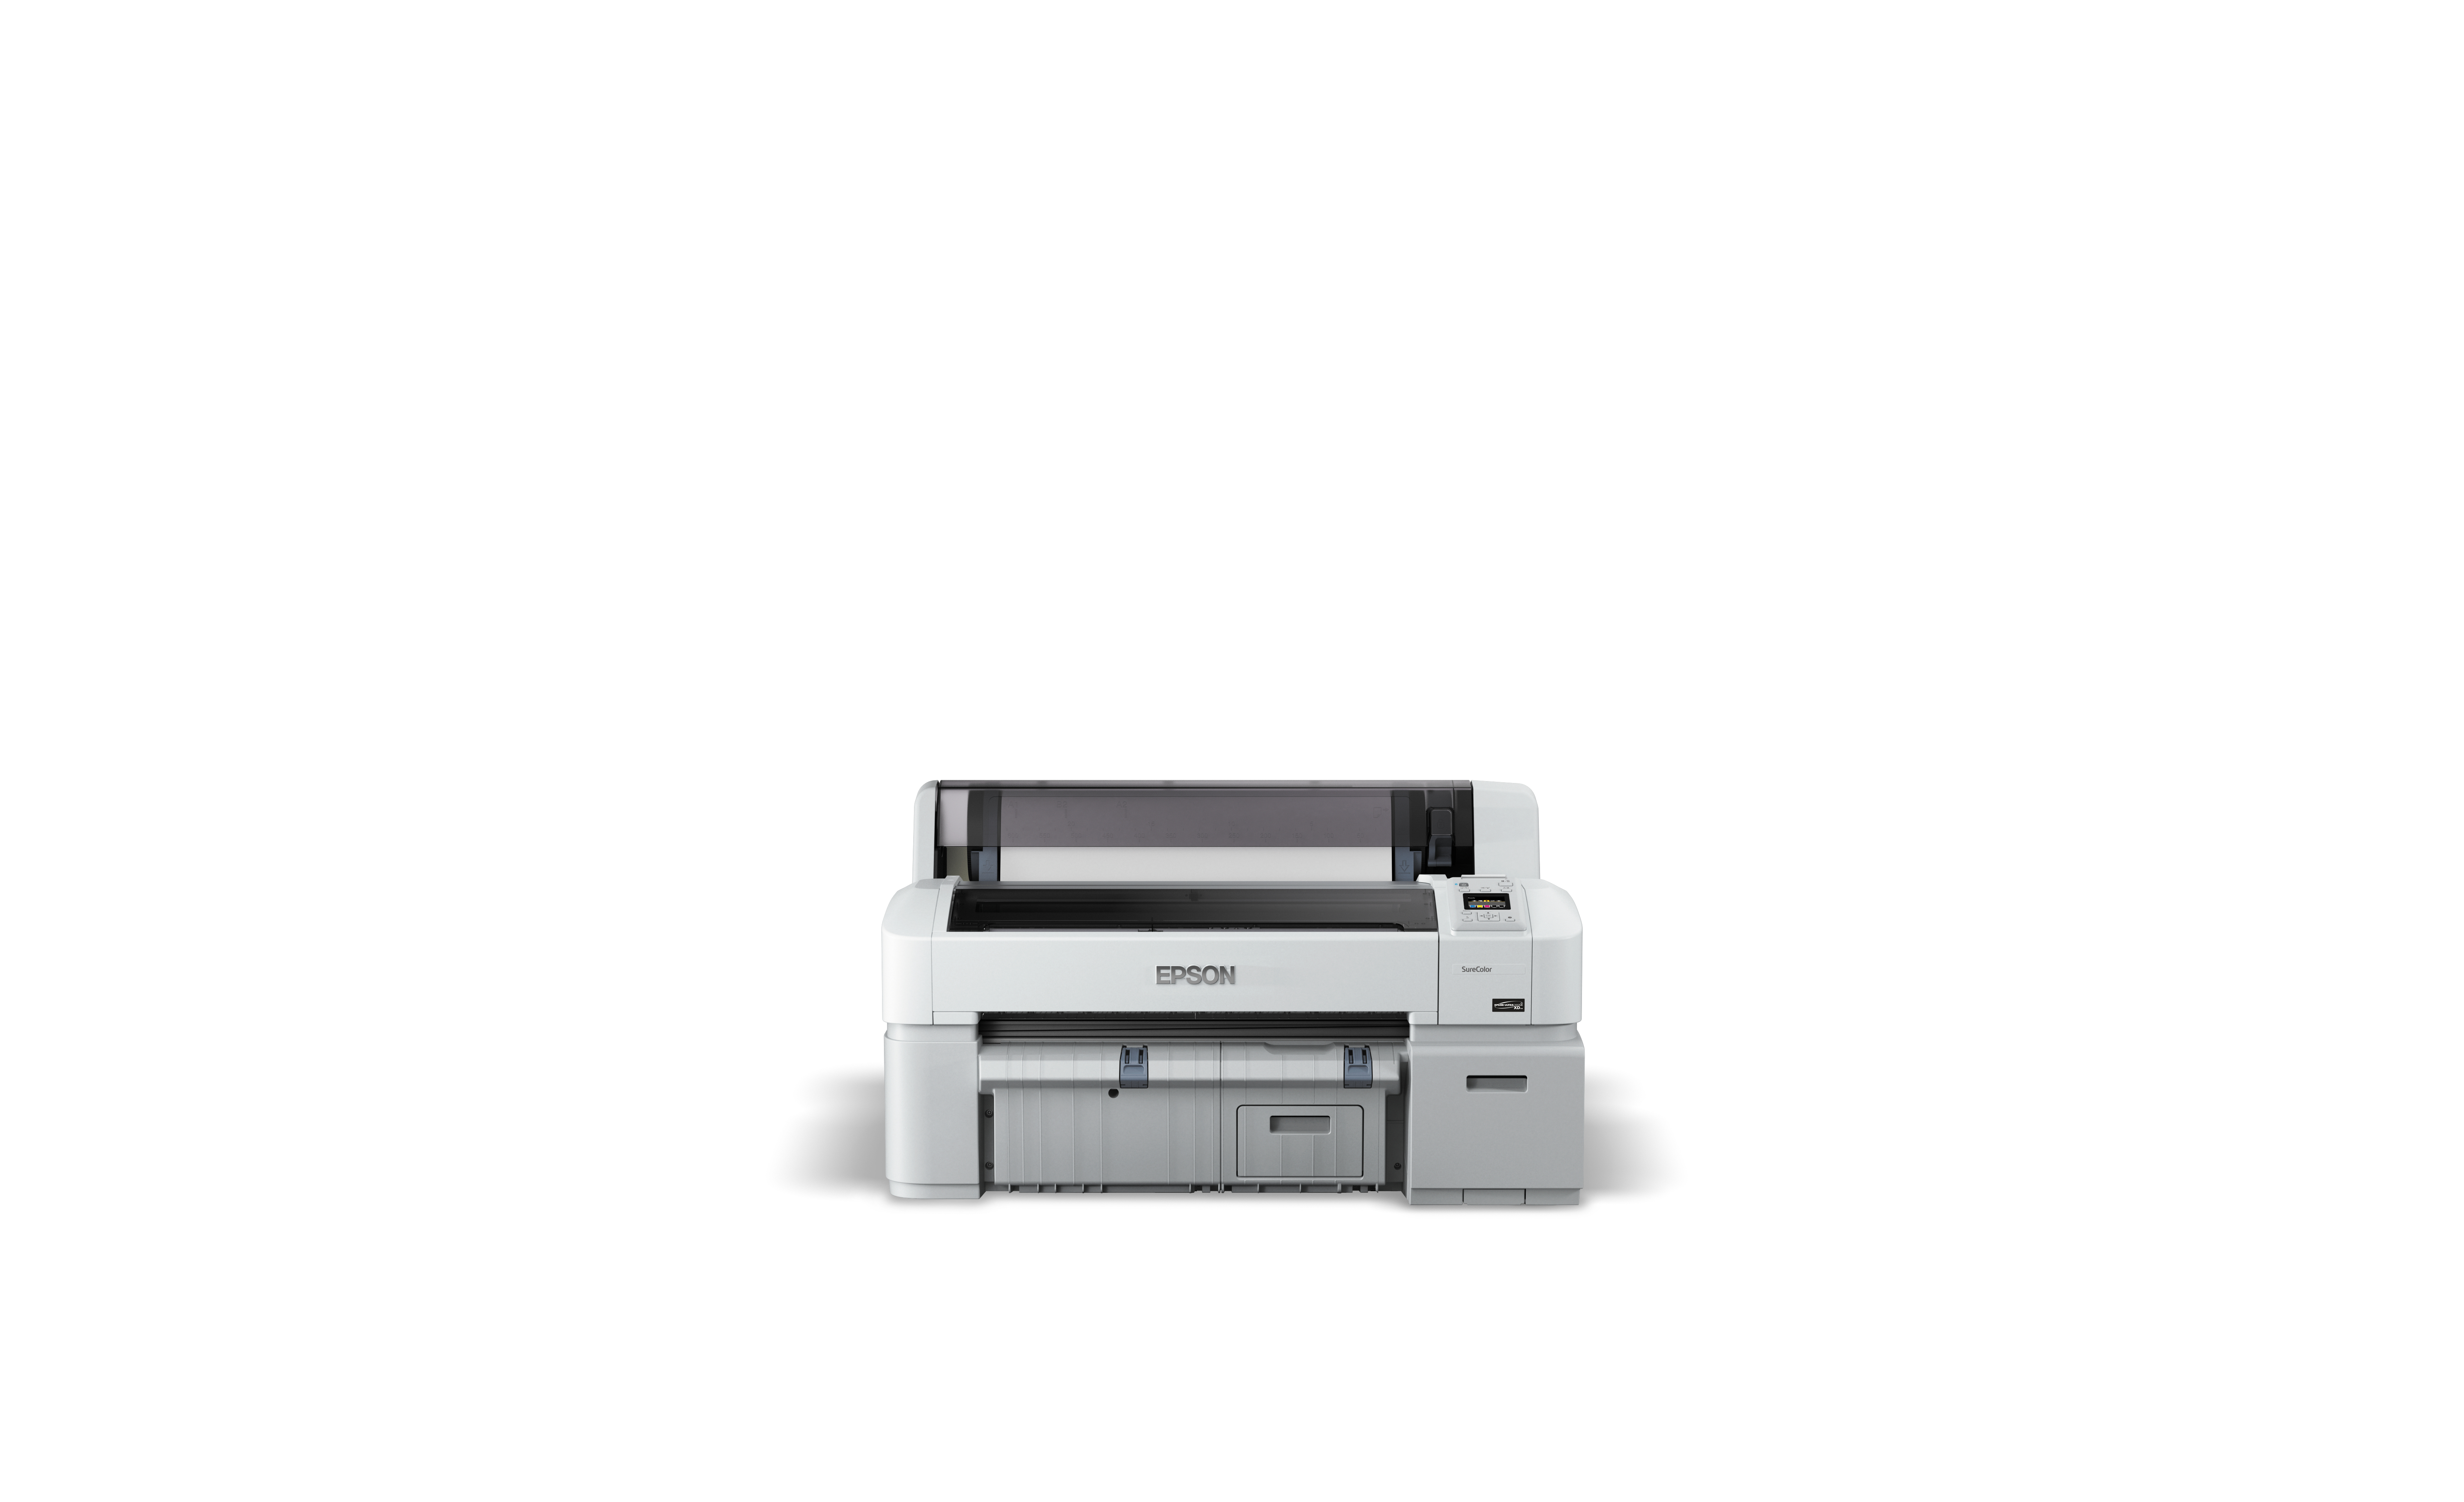 Epson SureColor SC-T3200 w/o stand - 610 mm (24")